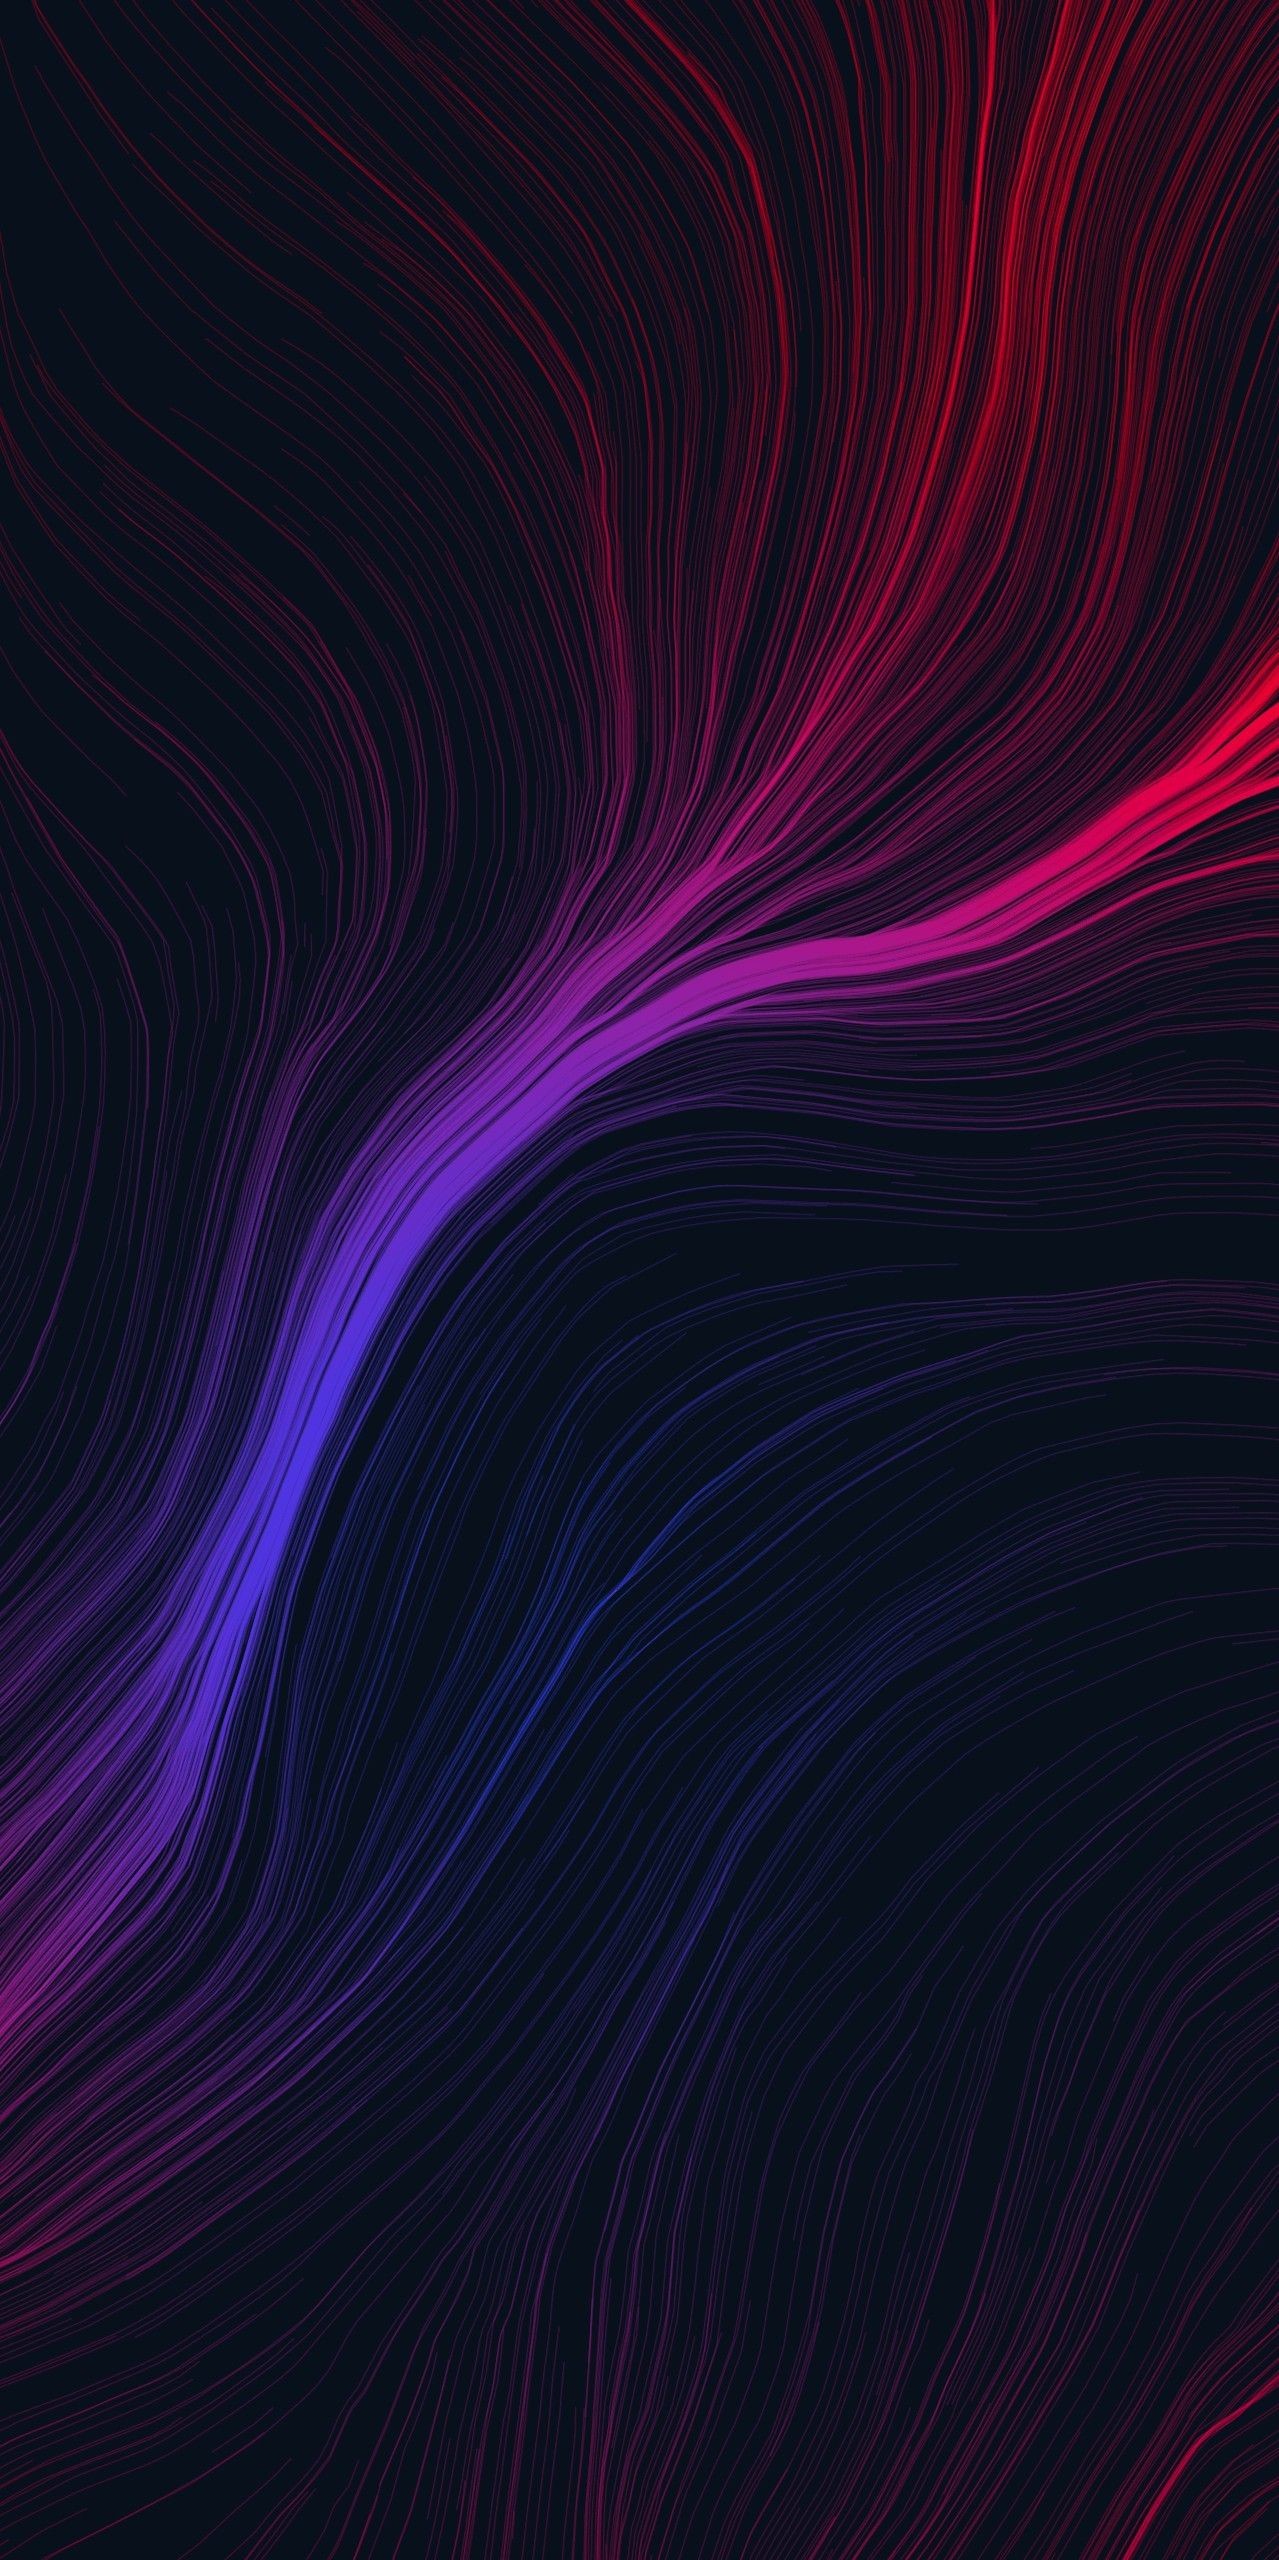 Colorful Abstract Wallpaper For Mobile : Beautiful Colorful Abstract Digital Art 4k Wallpaper 4